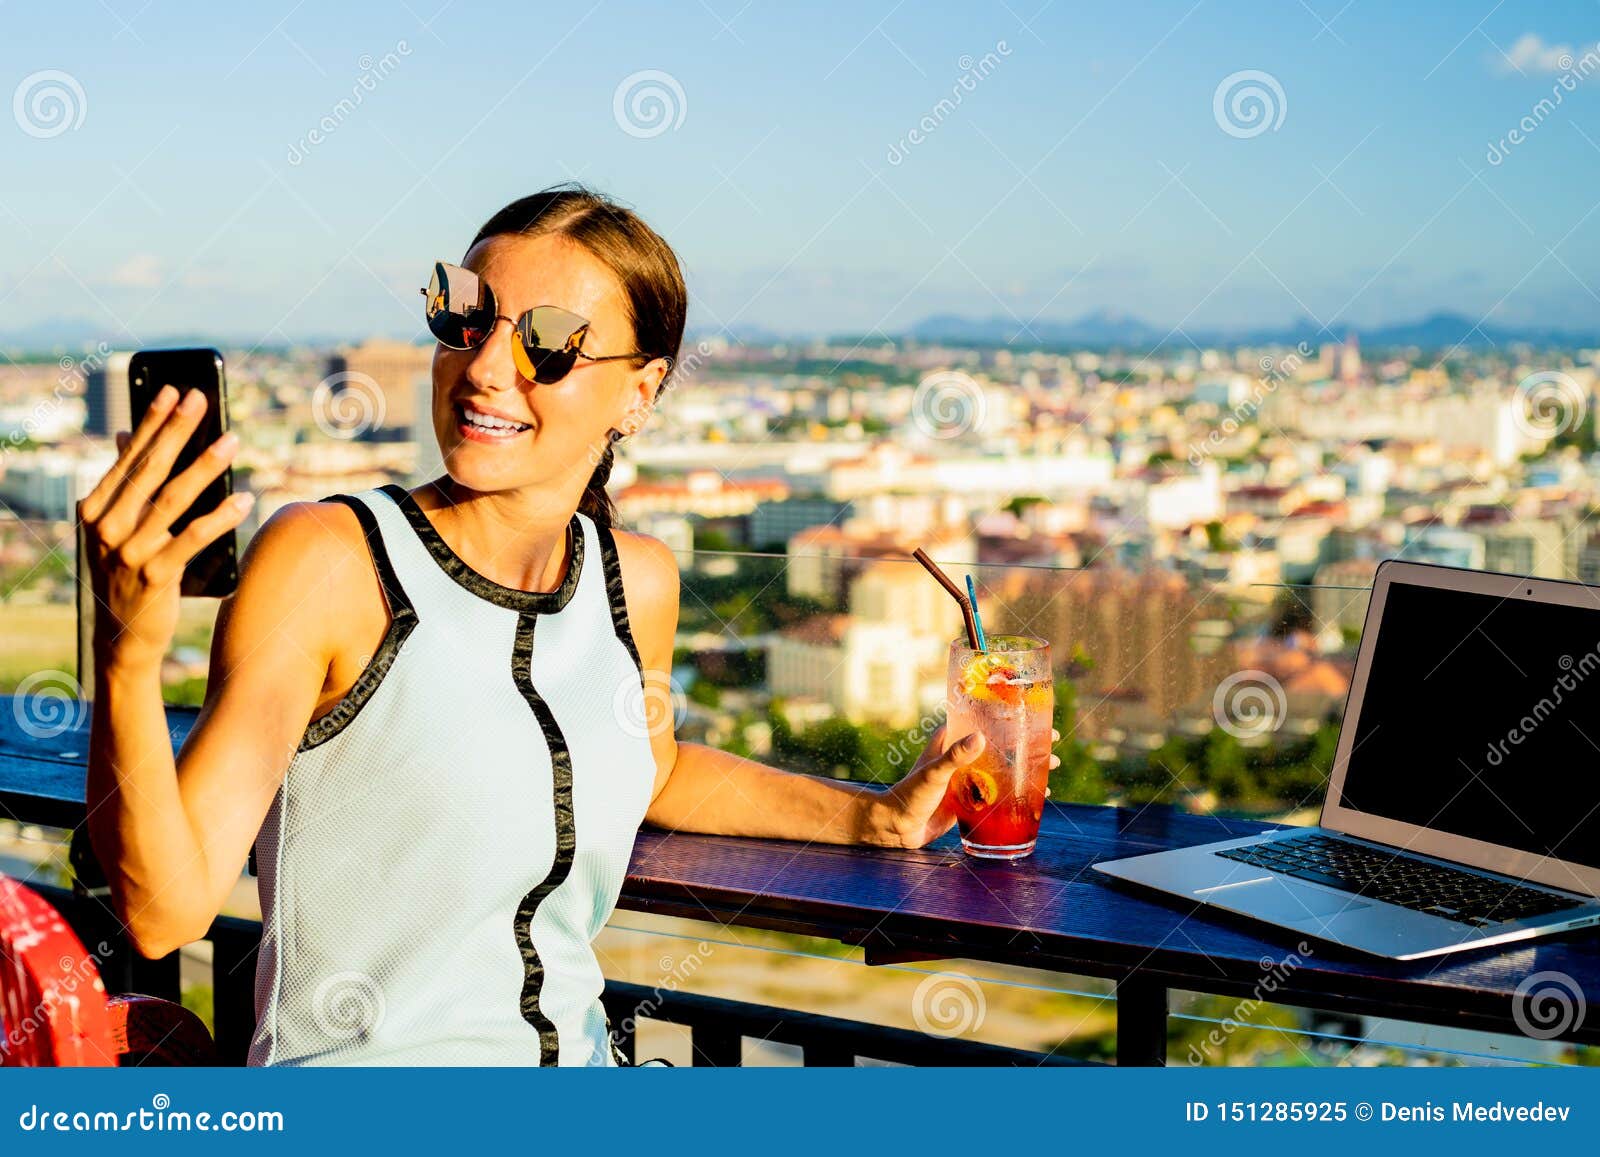 Selfie Attractive Girl in a Cafe on the Roof with Panoramic Views ...